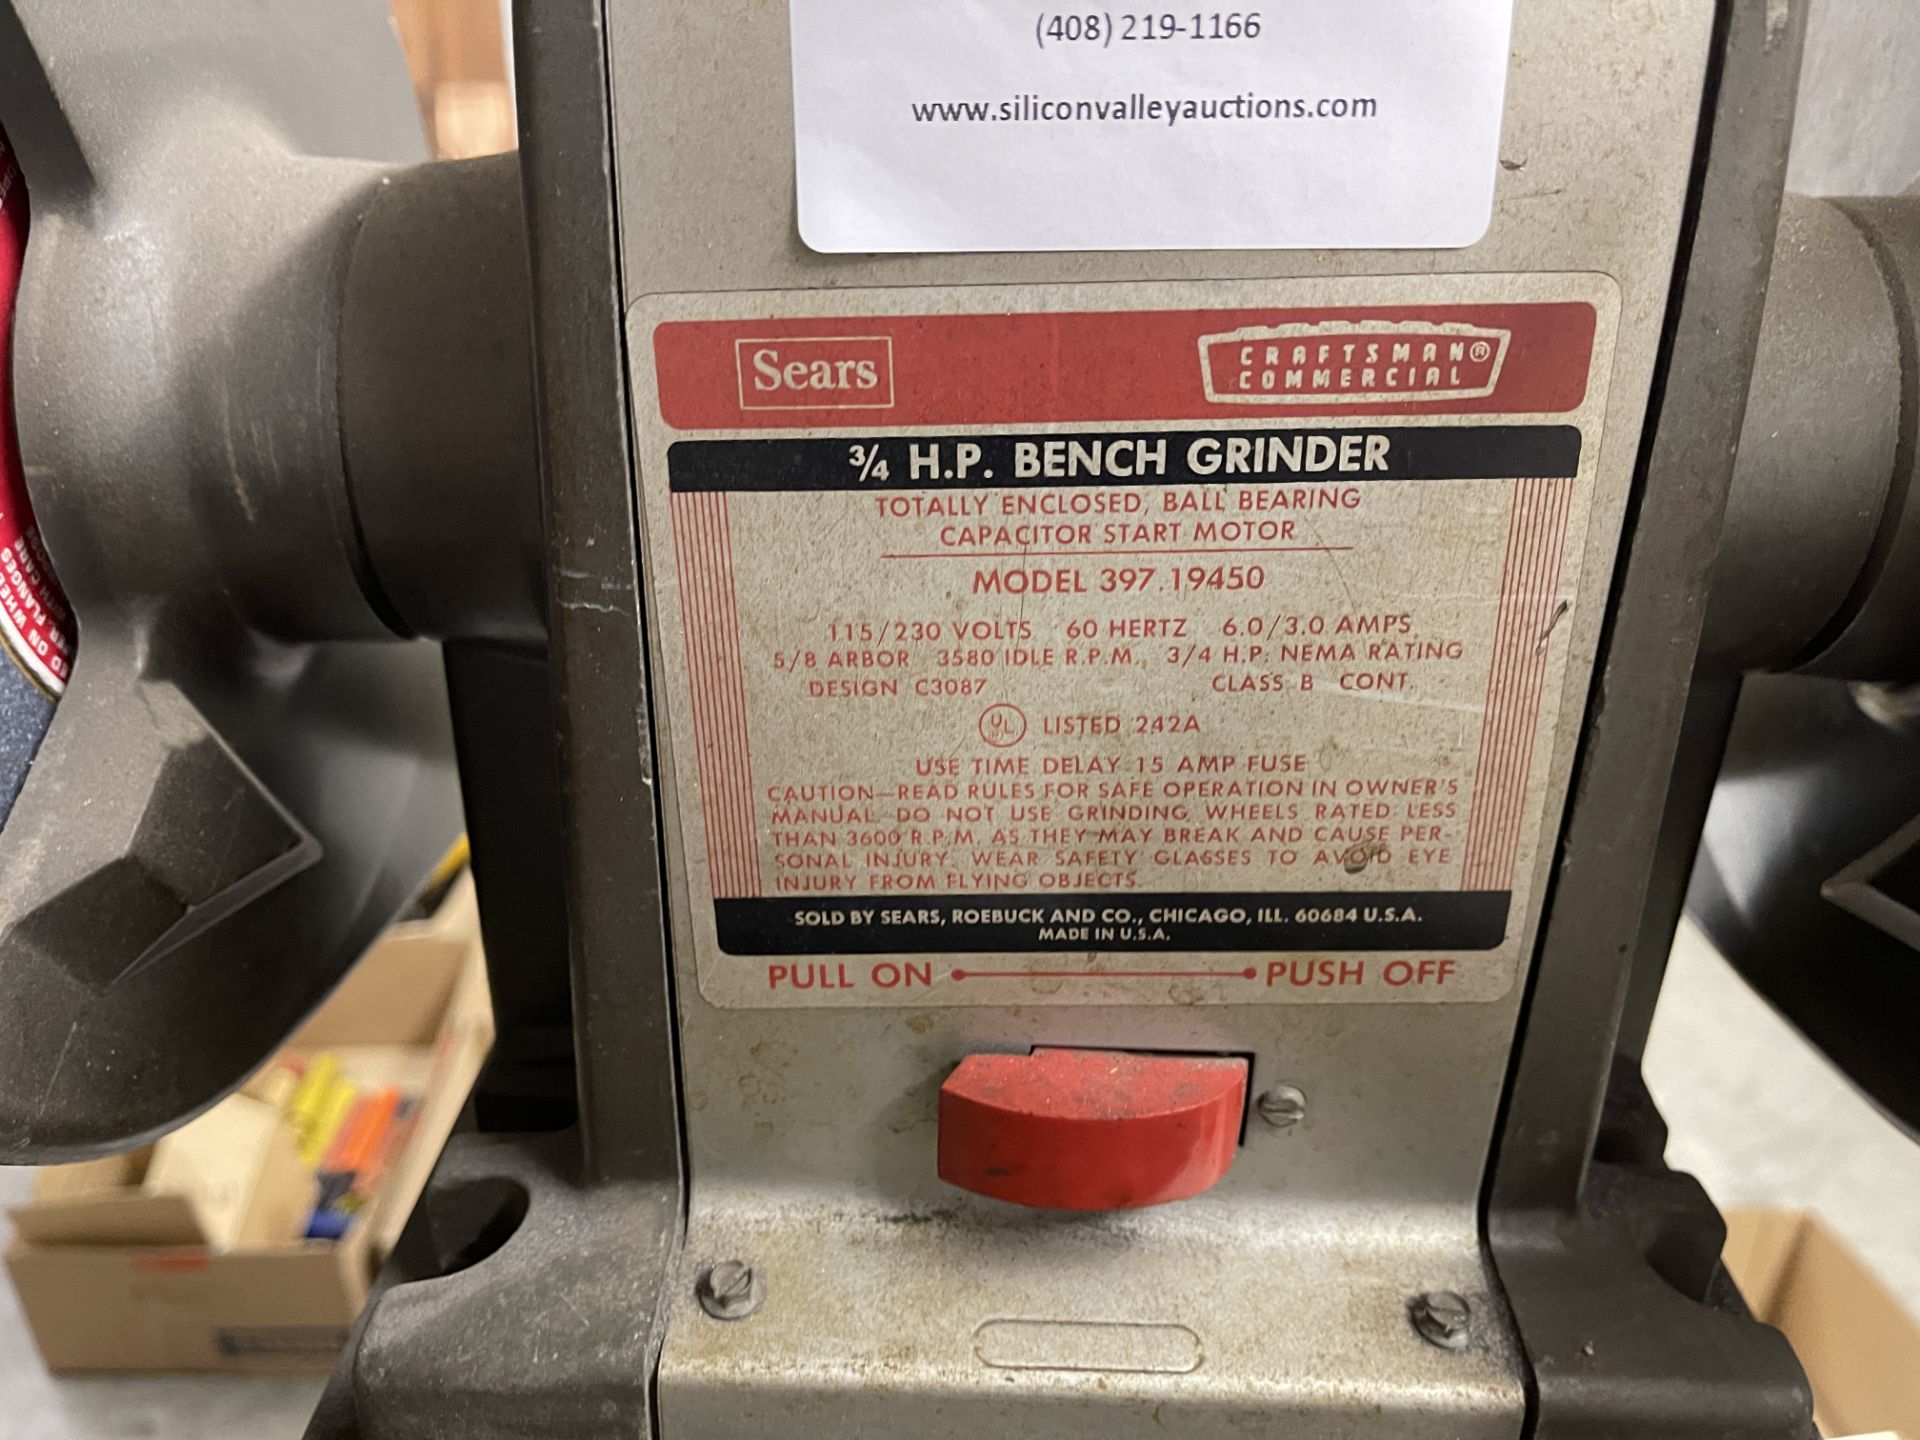 Sears 3/4 HP bench grinder model 397-19450 with stand - Image 2 of 2